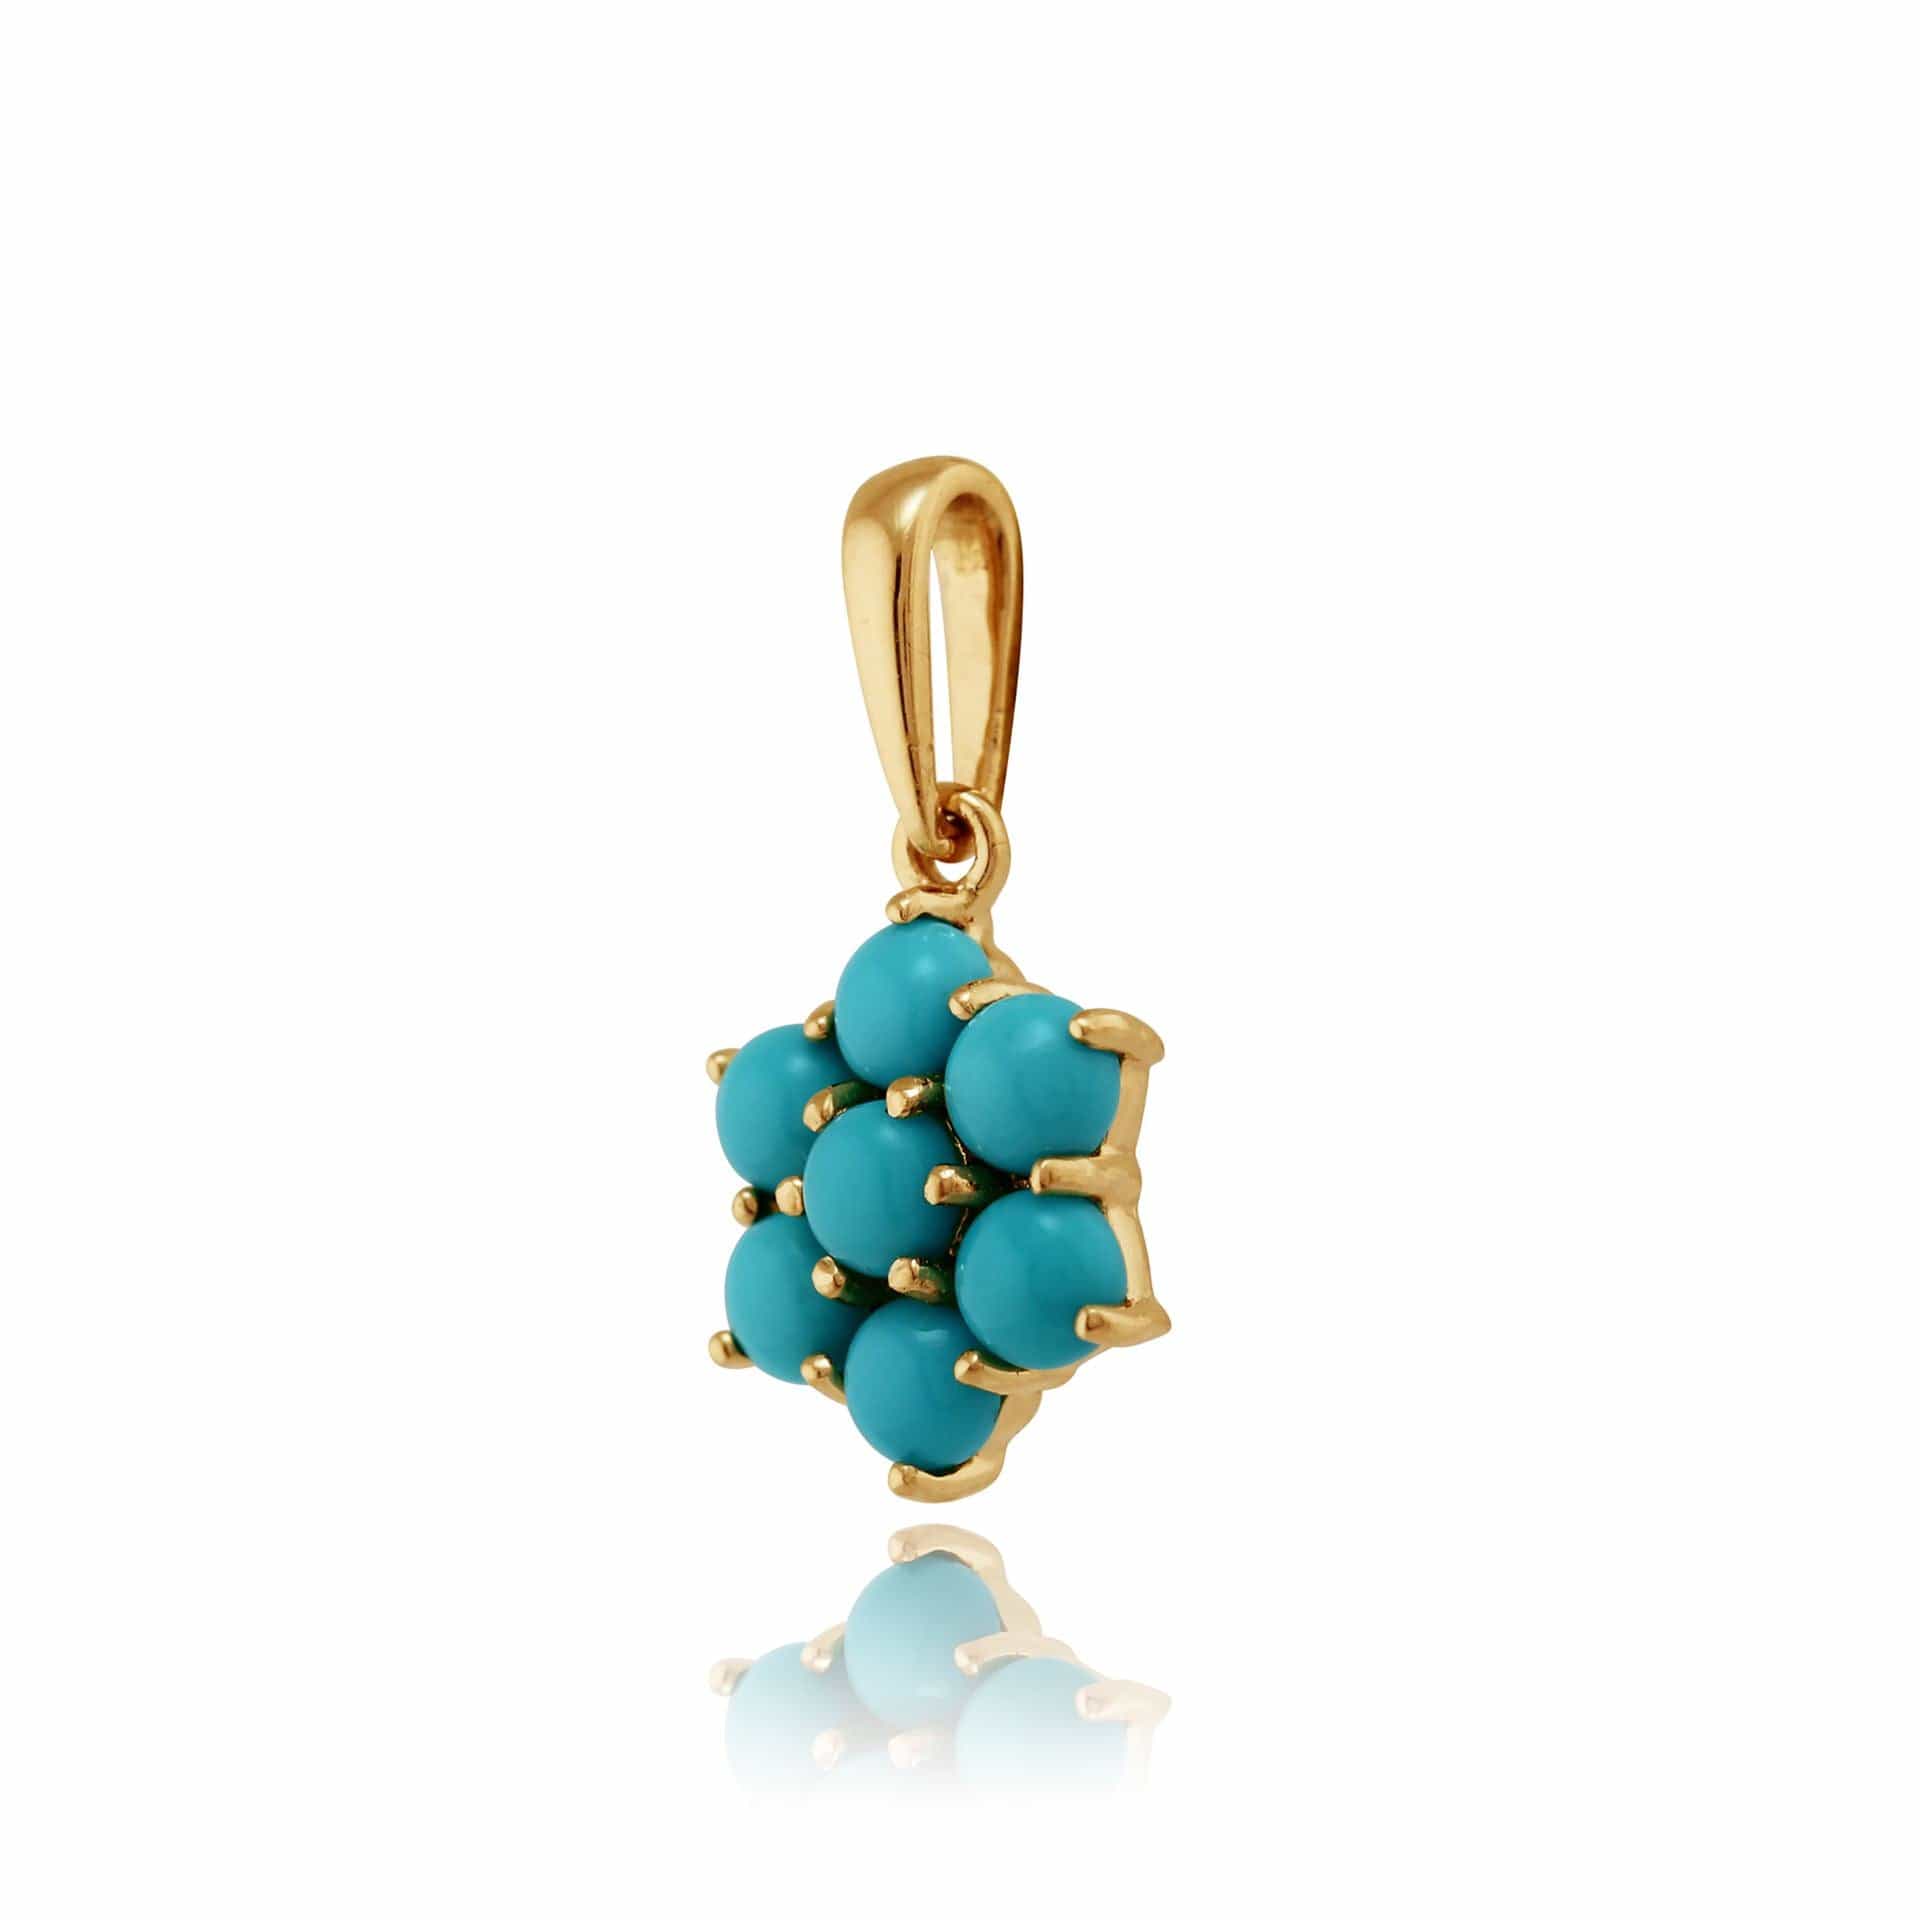 135E1065039-135P1449039 Floral Round Turquoise Cabochon Flower Cluster Stud Earrings & Pendant Set in 9ct Yellow Gold 4